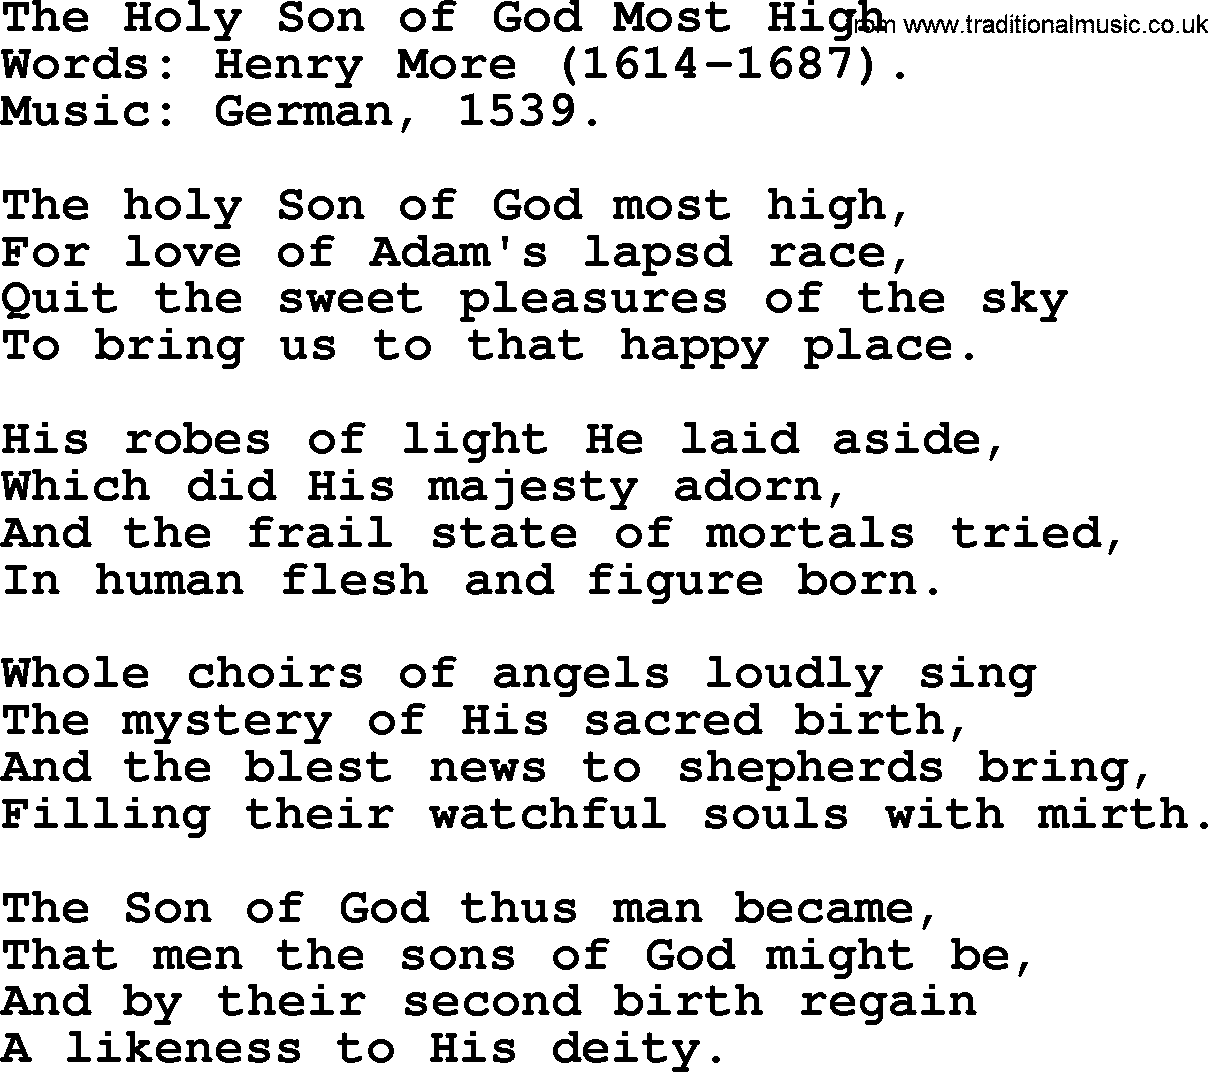 Christmas Hymns, Carols and Songs, title: The Holy Son Of God Most High, lyrics with PDF